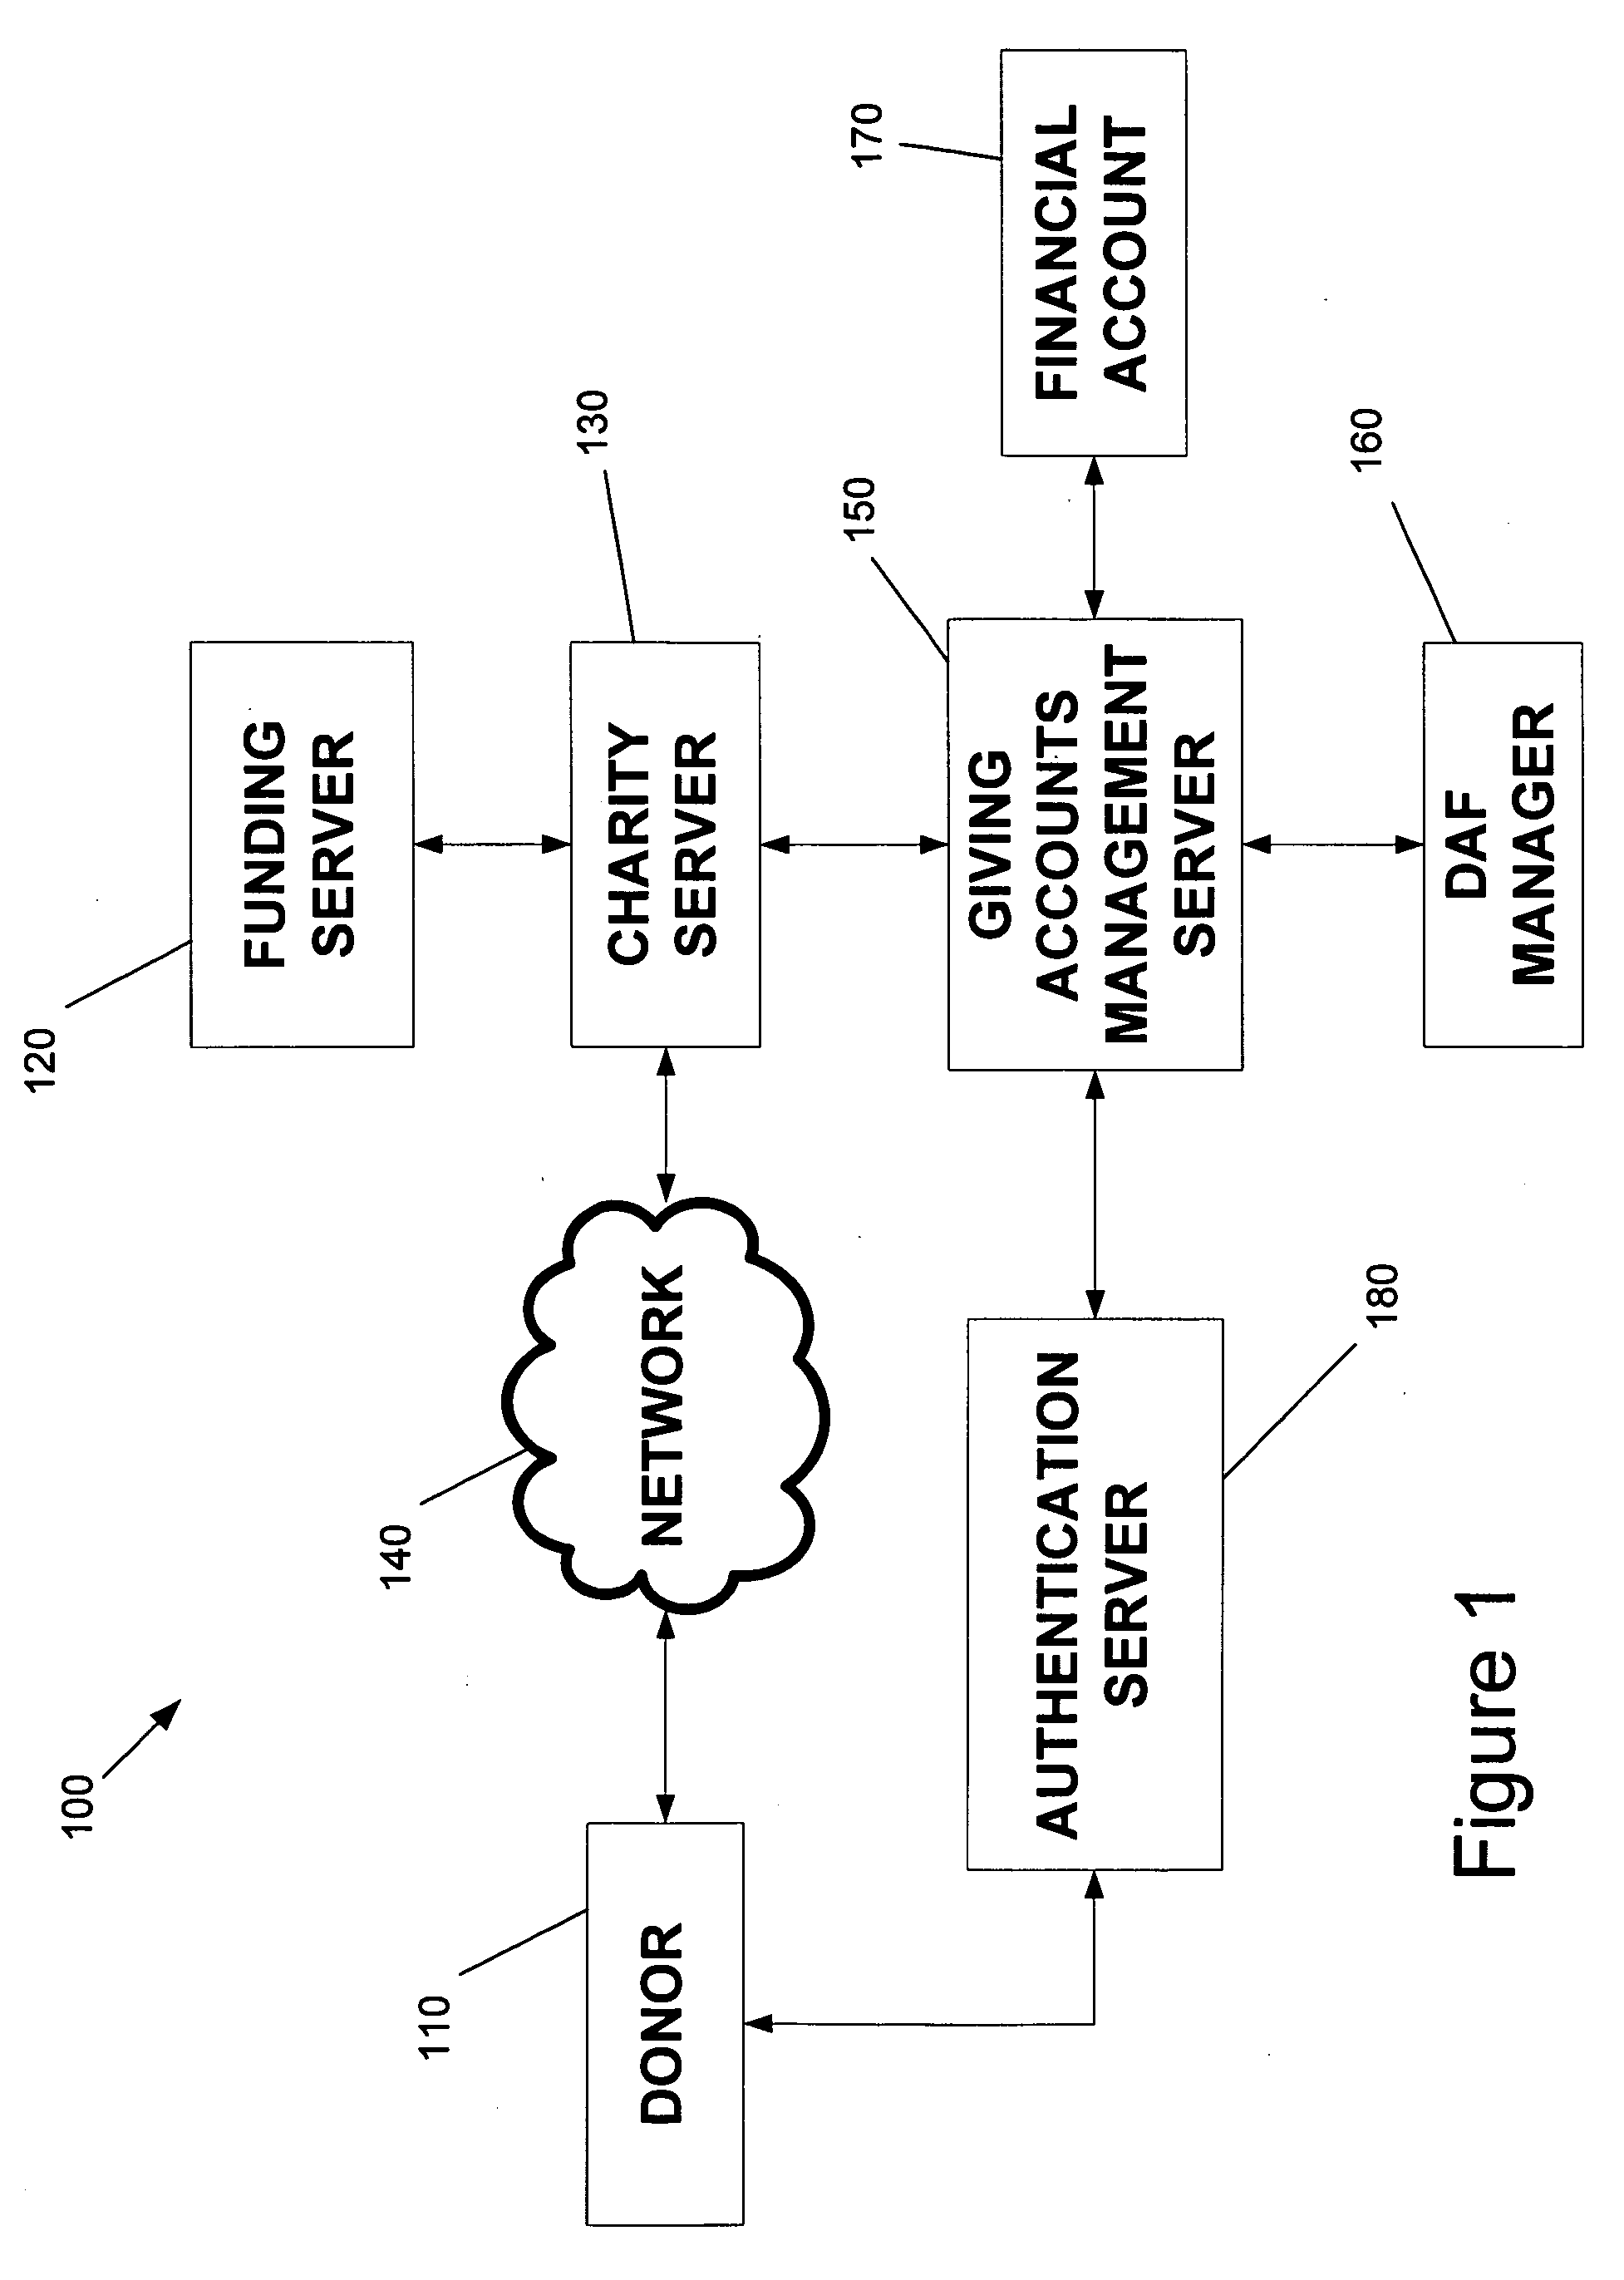 Method and system for direction of funds to non-profits